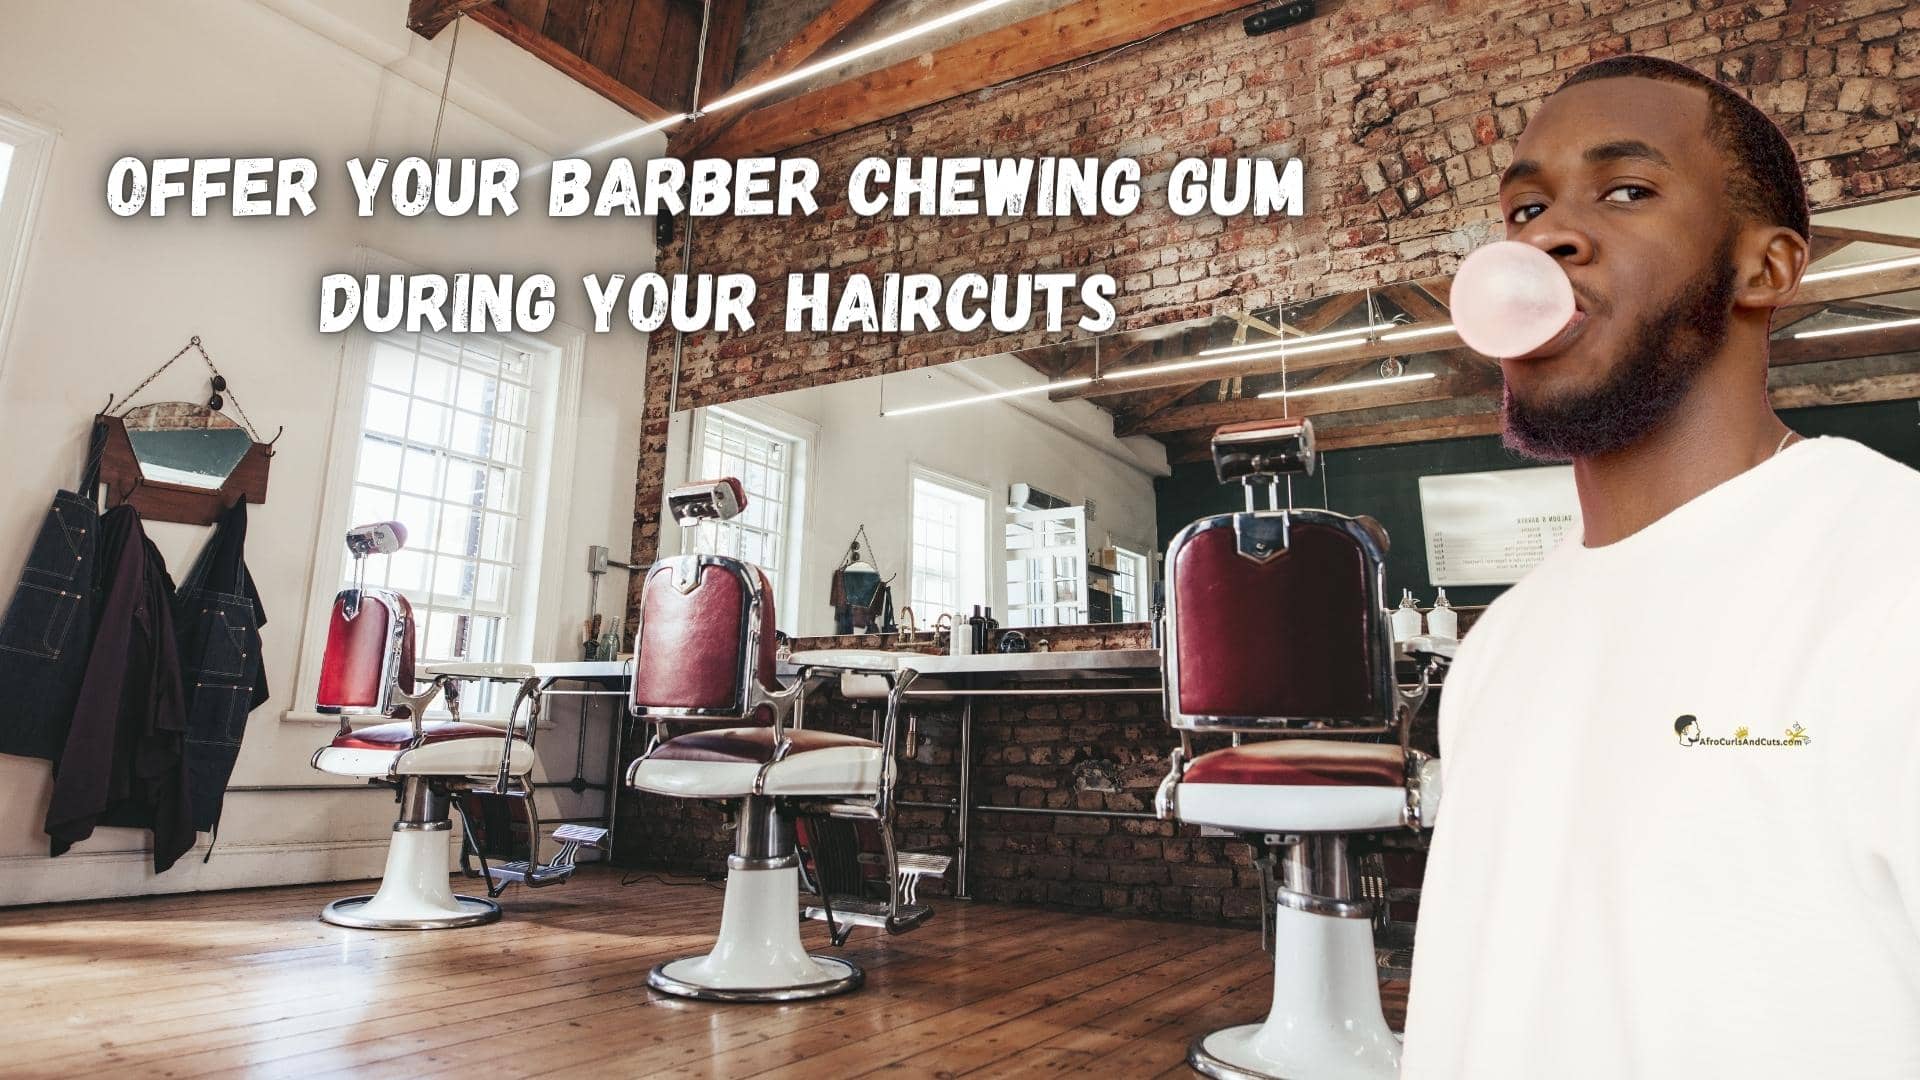 Chew gum during your haircuts to shut your barber up